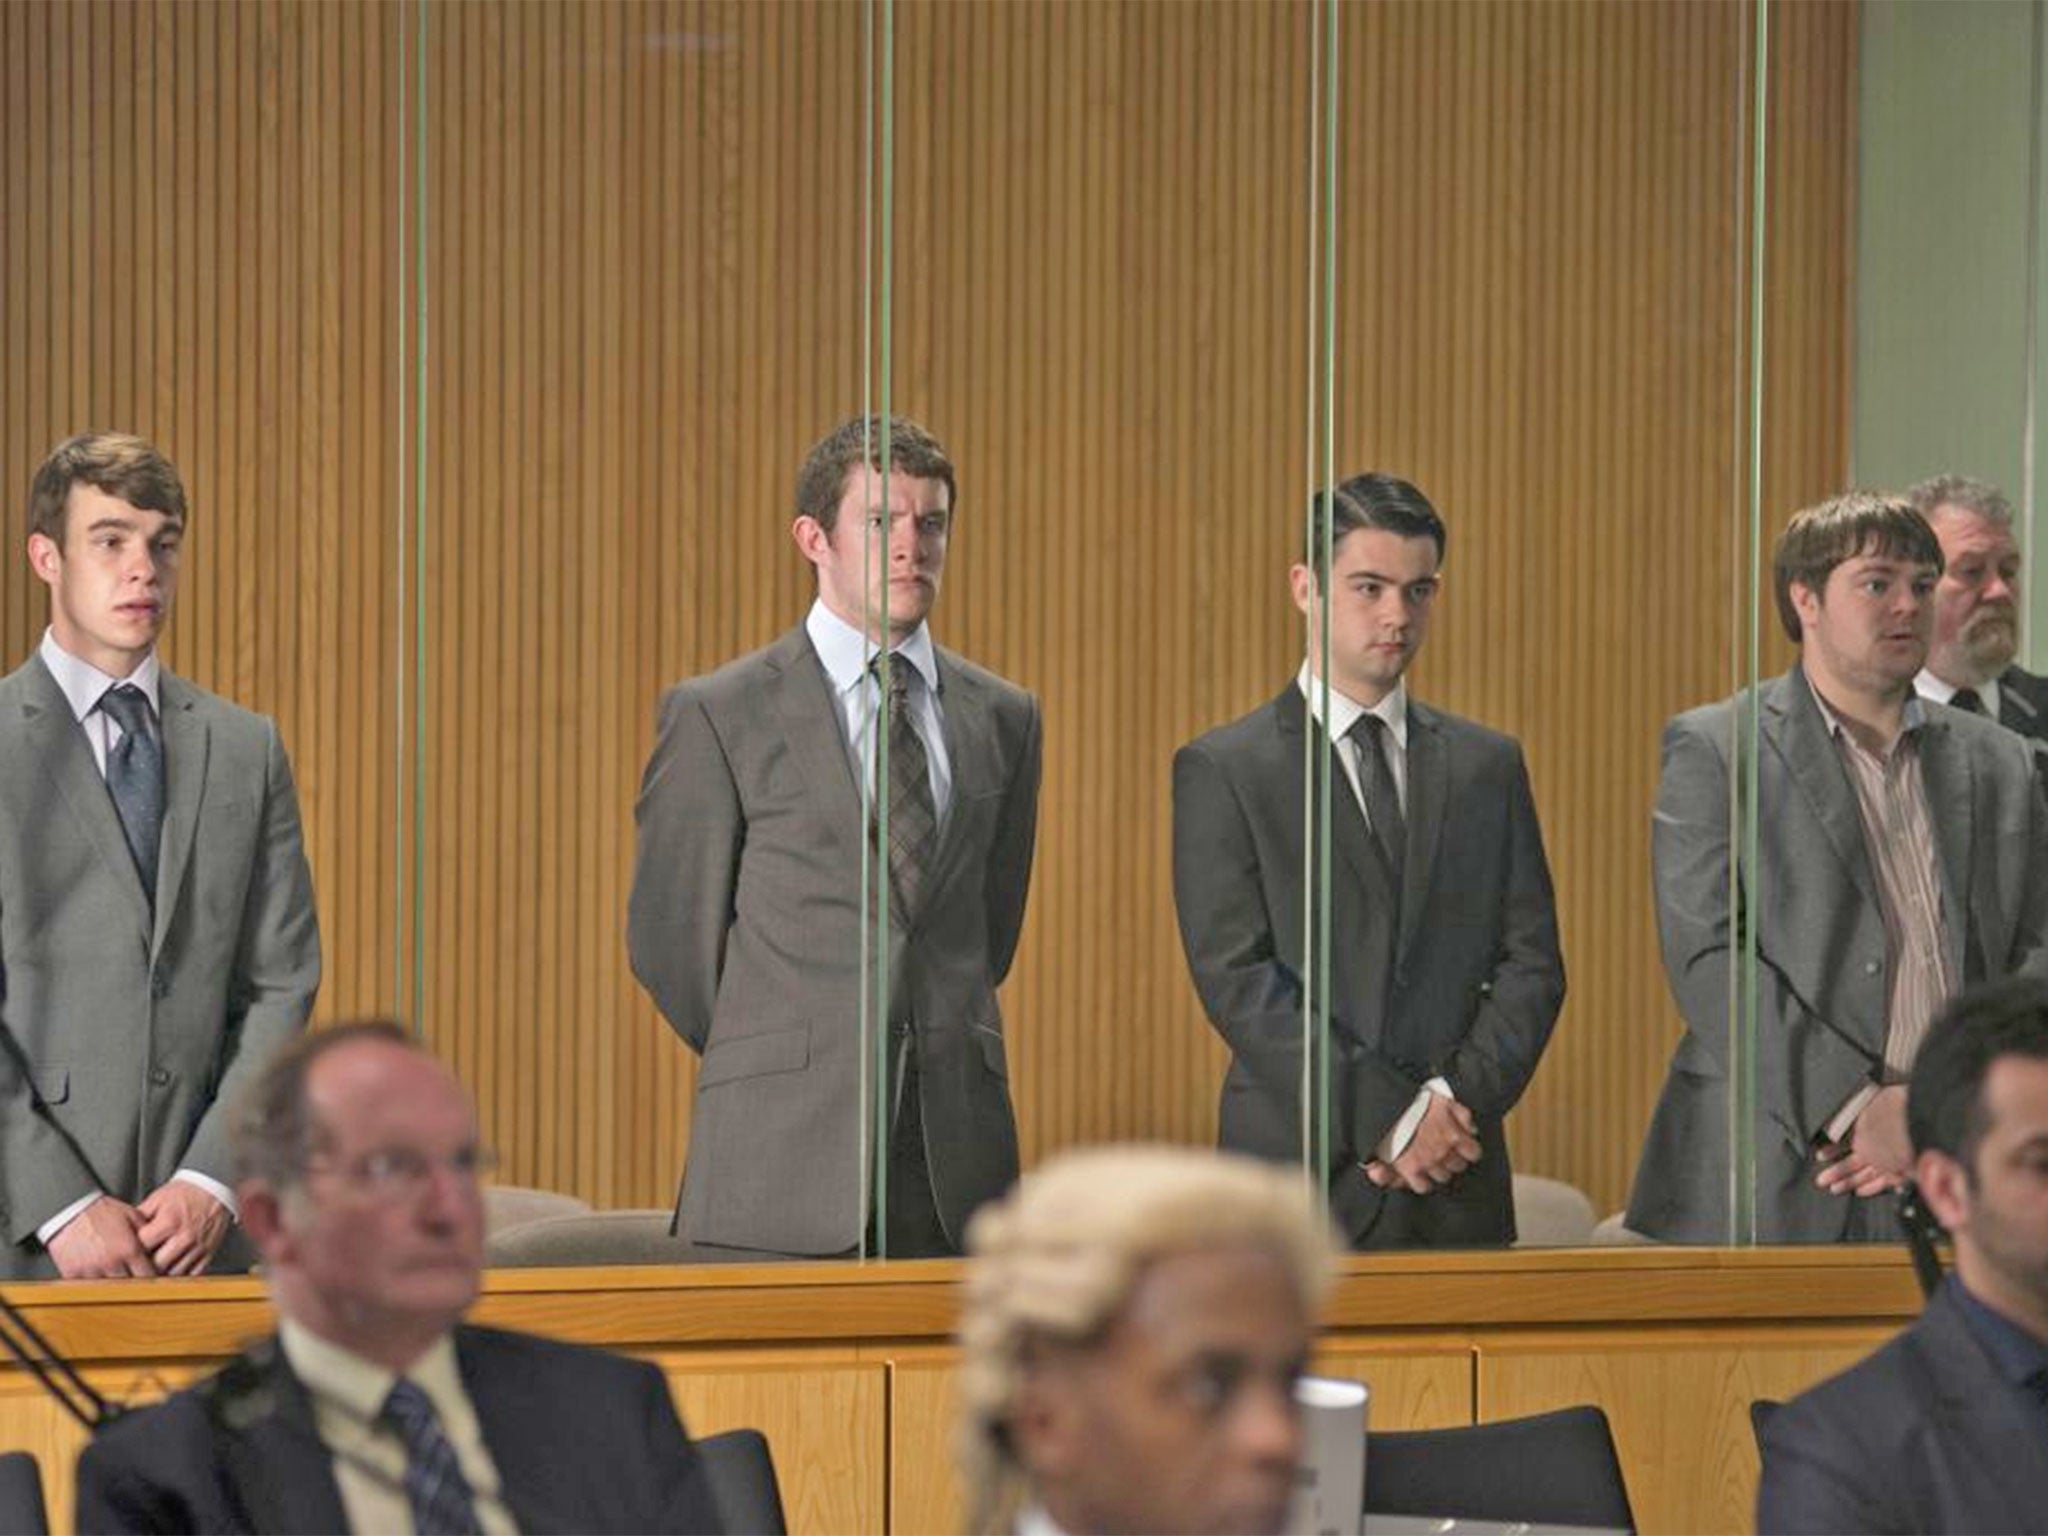 The accused: Nico Mirallegro, Philip Hill Pearson, Jack McMullen and Andrew Ellis in ‘Common’